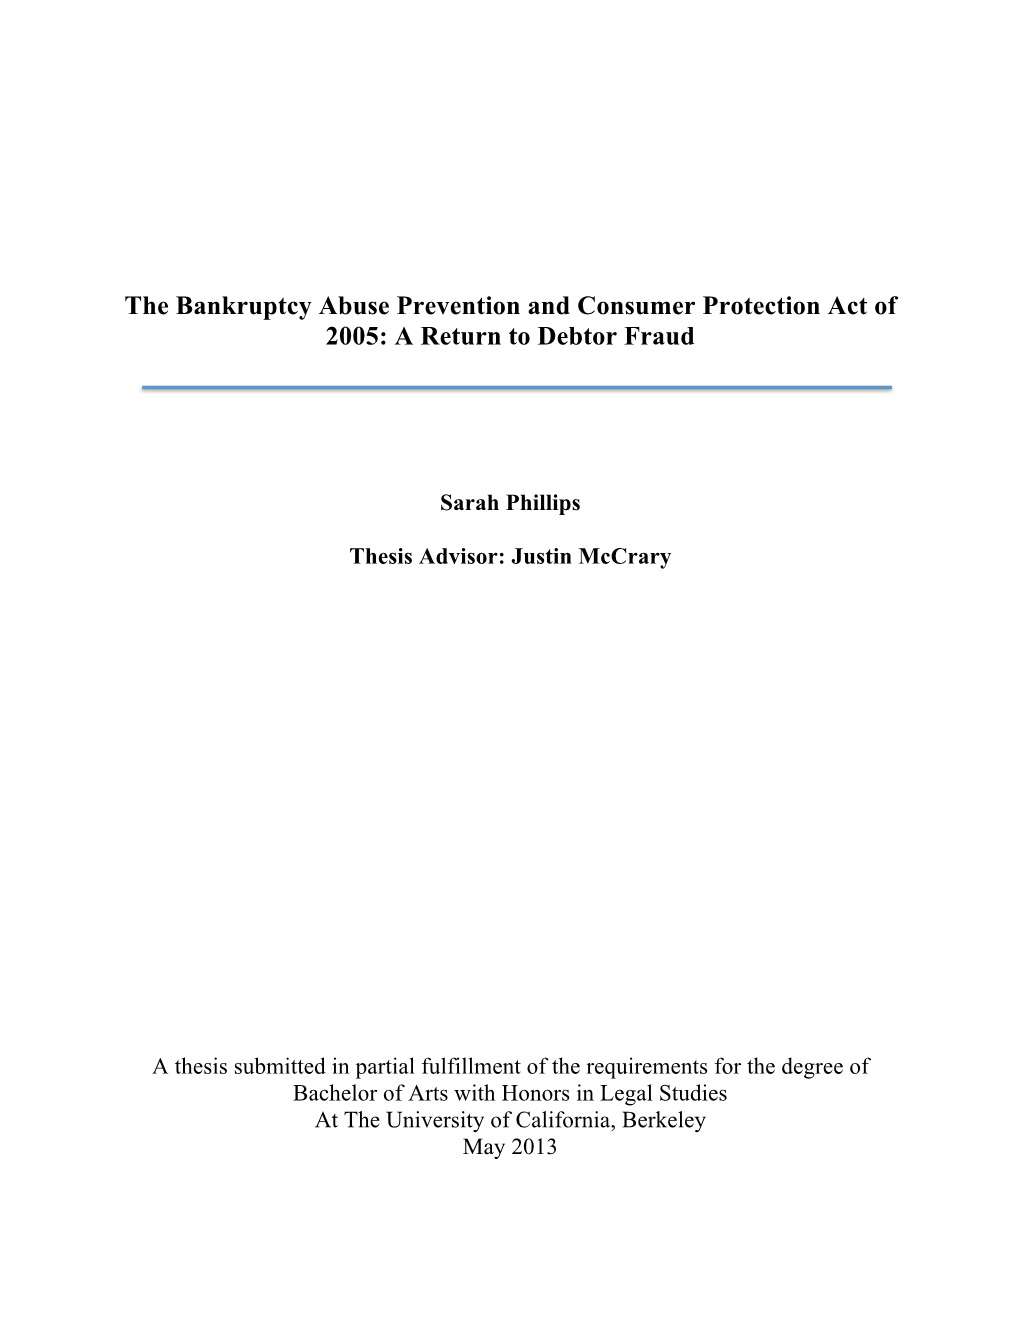 The Bankruptcy Abuse Prevention and Consumer Protection Act of 2005: a Return to Debtor Fraud